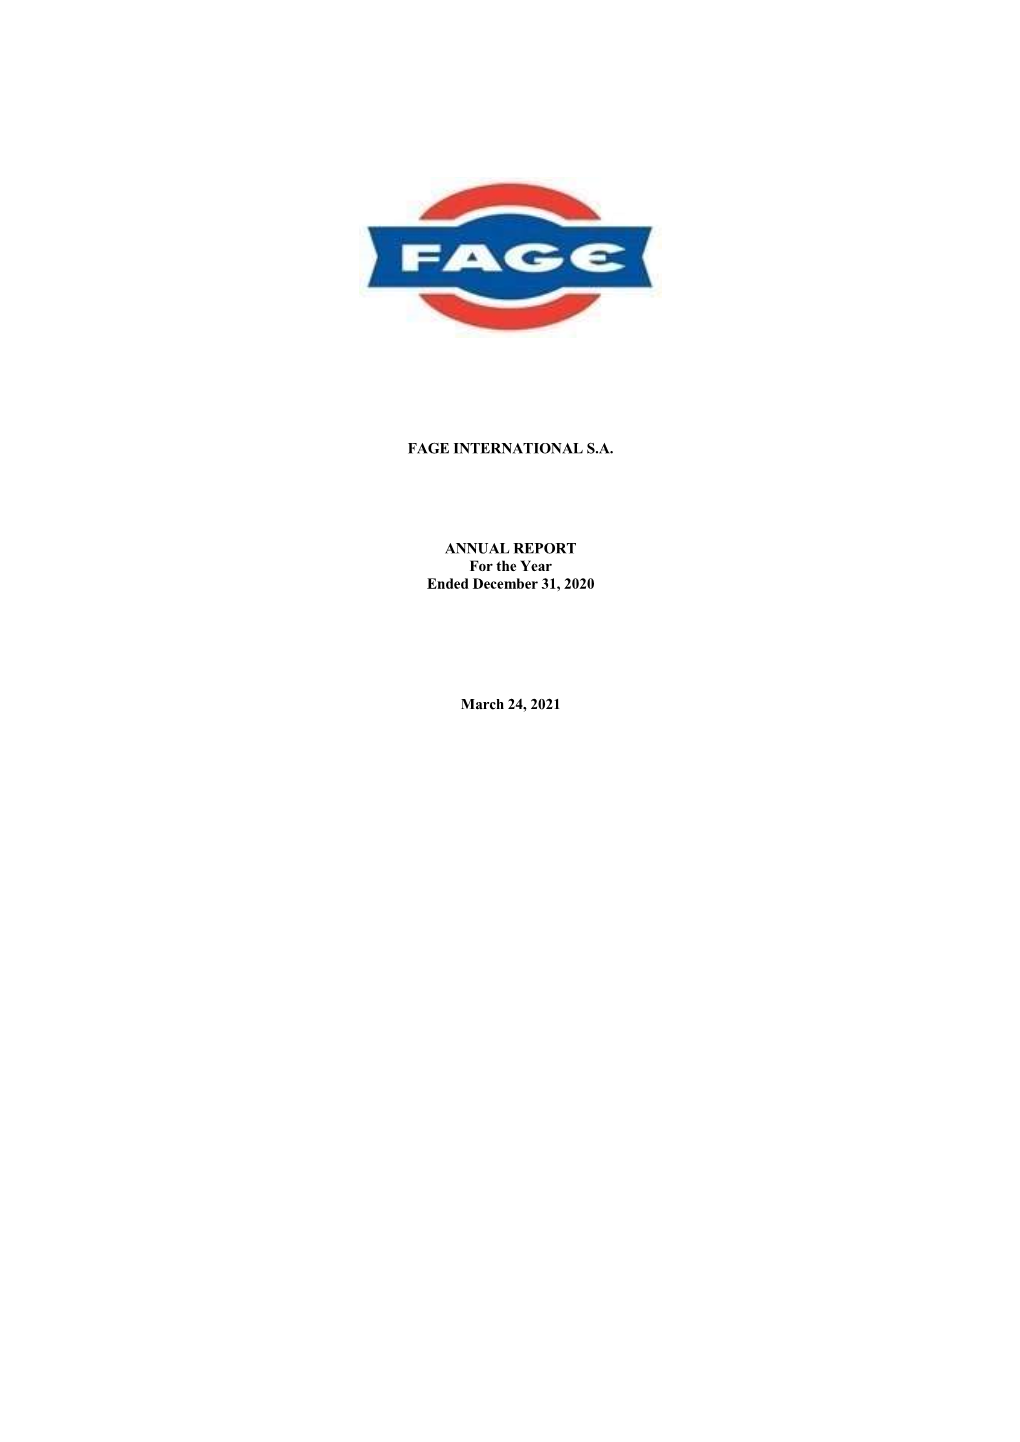 FAGE INTERNATIONAL S.A. ANNUAL REPORT for the Year Ended December 31, 2020 March 24, 2021